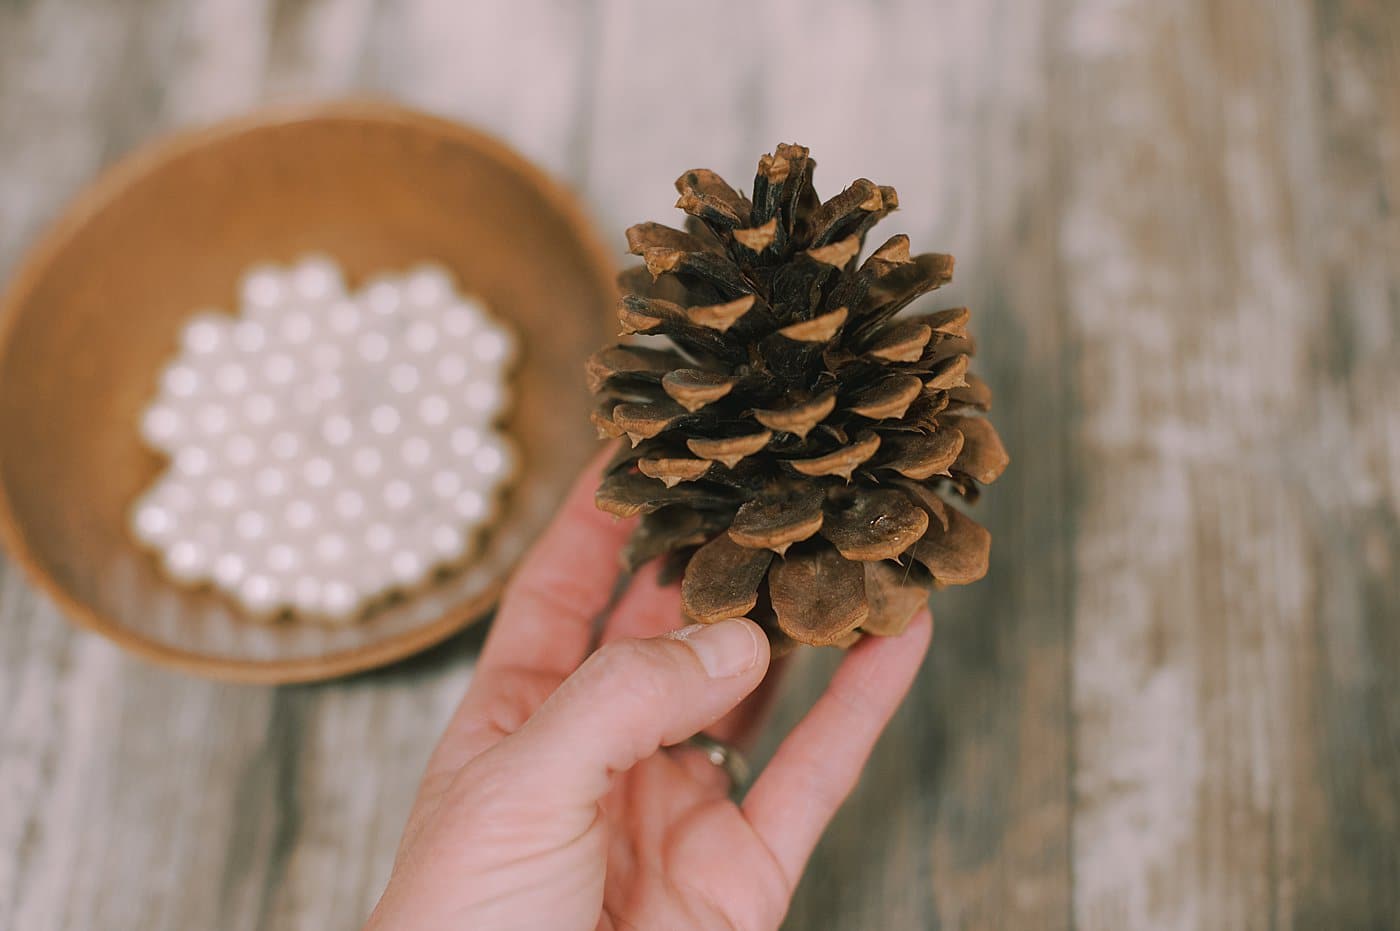 Hot glue pearls to the ends of the pine cone.